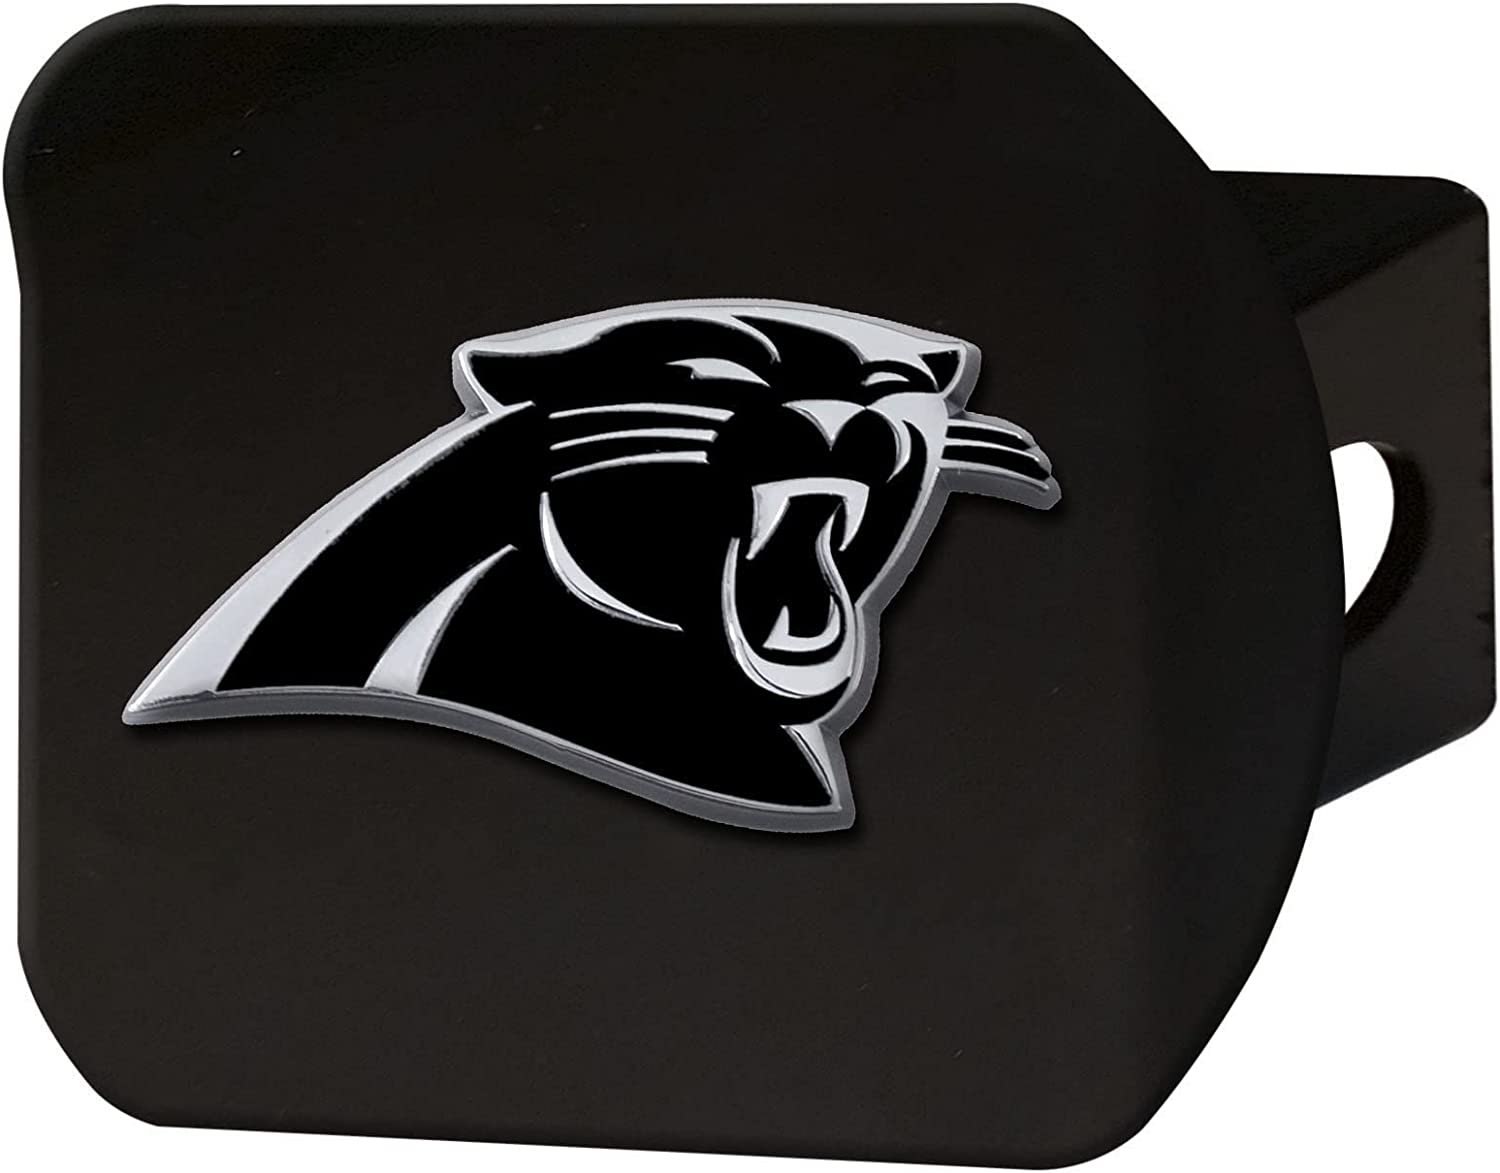 FANMATS 21500 NFL - Carolina Panthers Black 2" Square Type III Metal Hitch Cover with 3D Chrome Emblem,2" Square Type III Hitch Cover